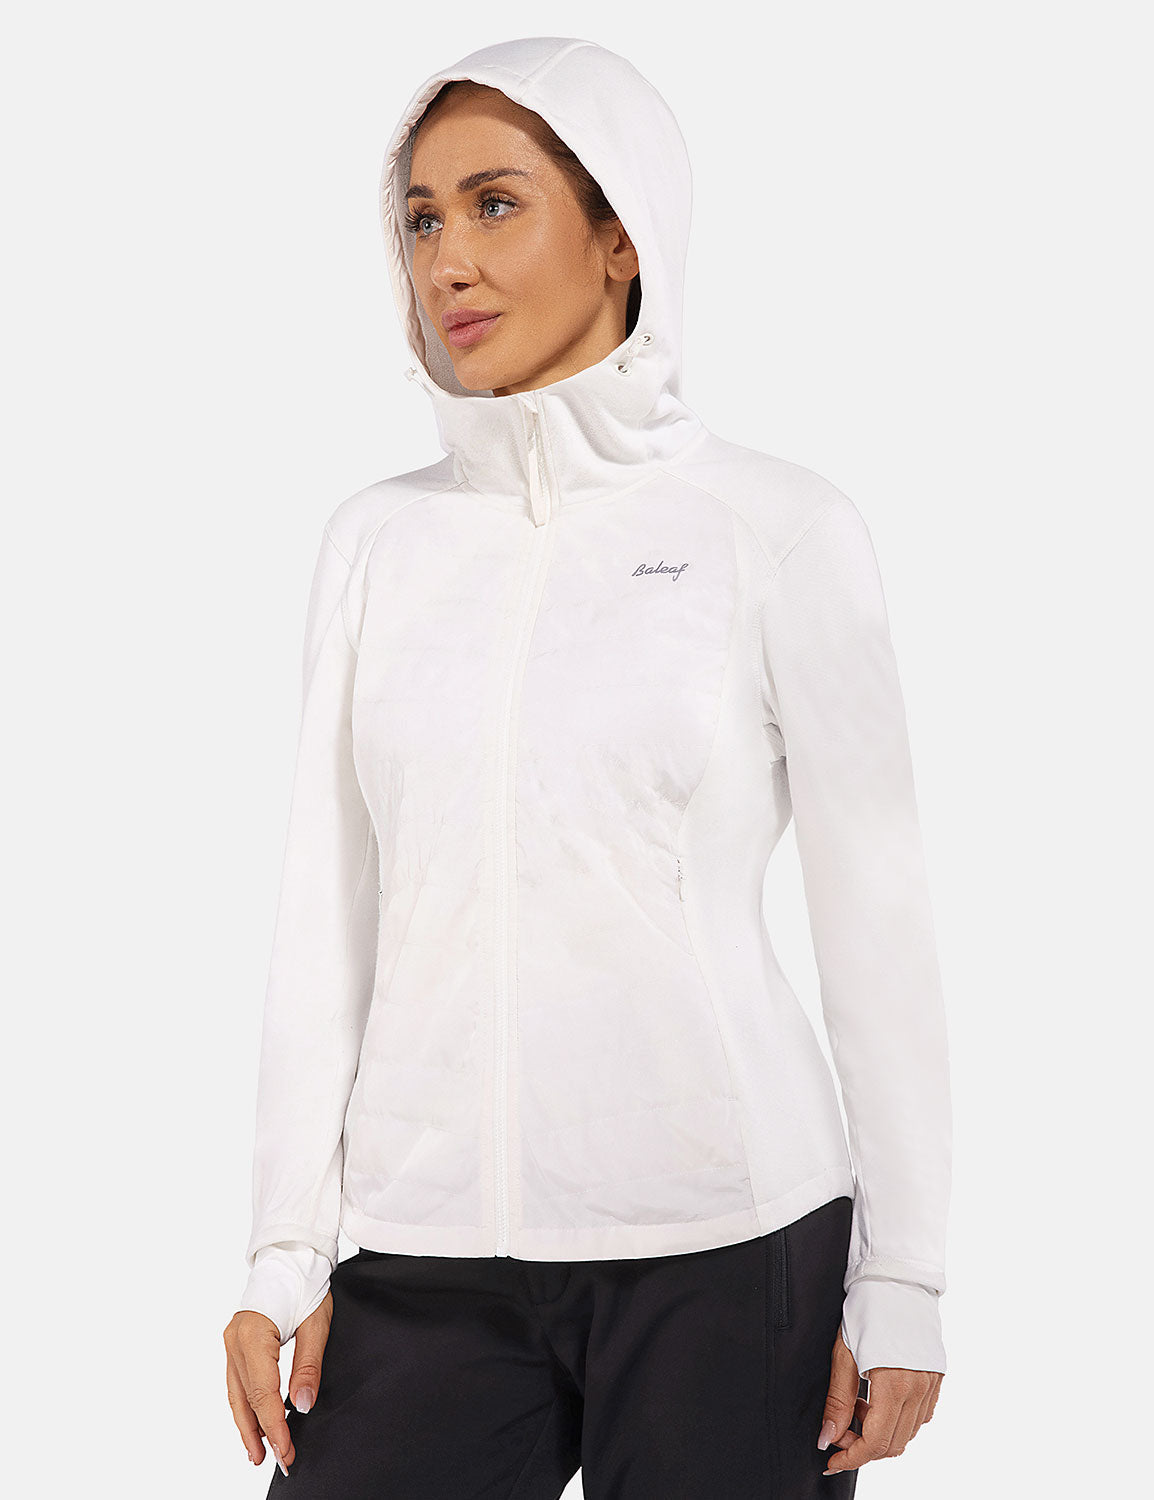 Baleaf Women's Triumph Thermal Water-Resistant Hooded Jacket cga030 Star White Side